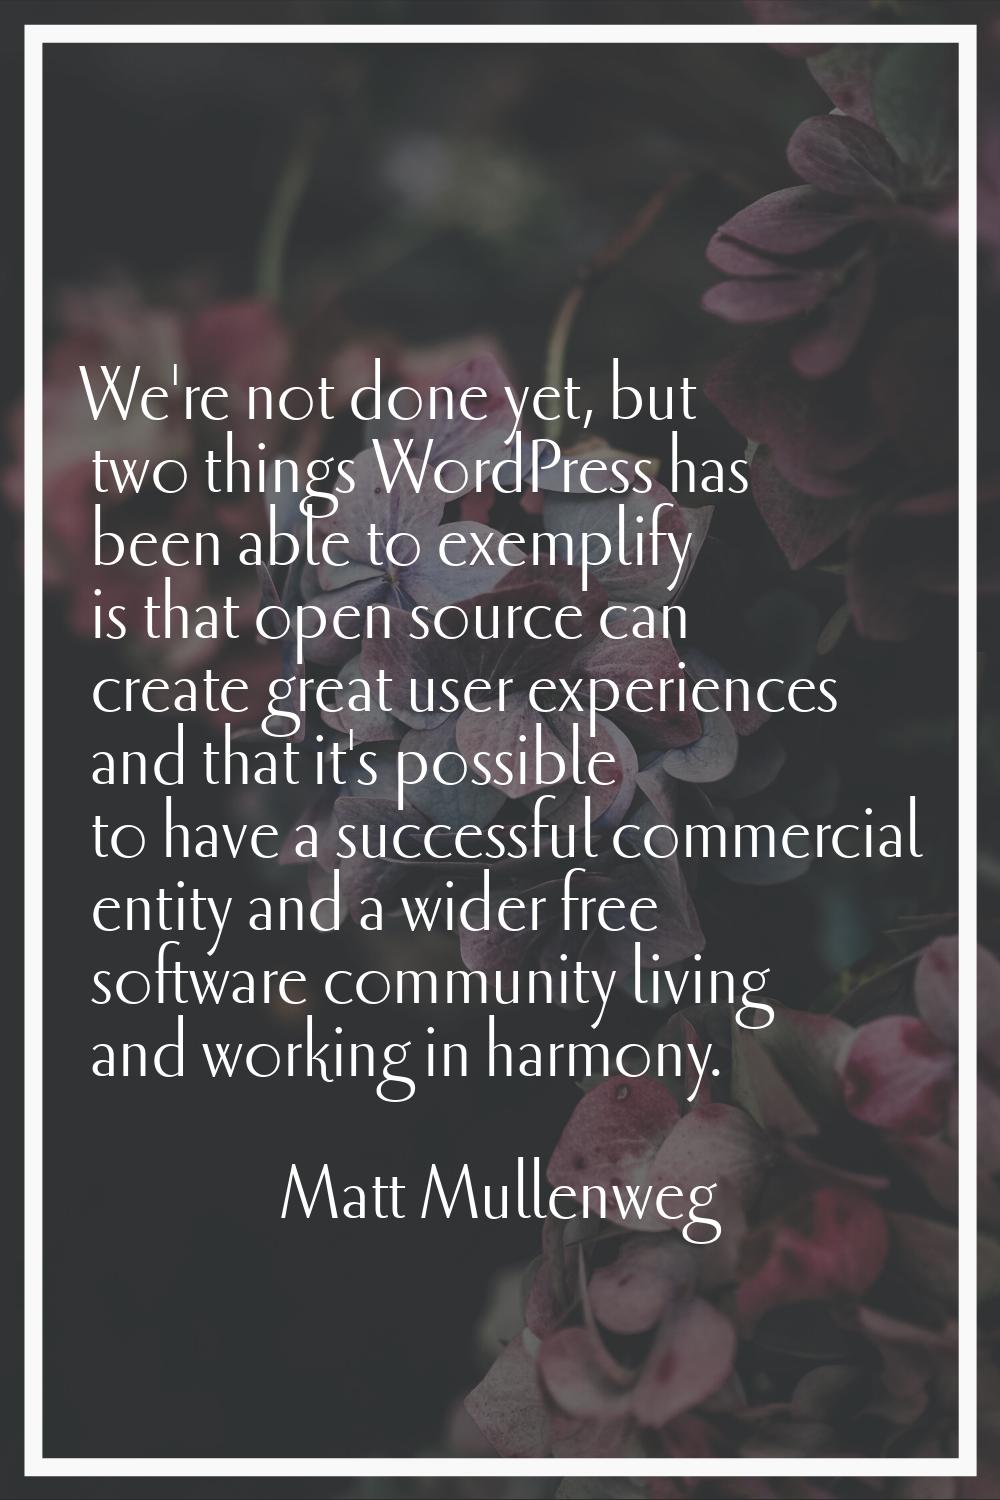 We're not done yet, but two things WordPress has been able to exemplify is that open source can cre